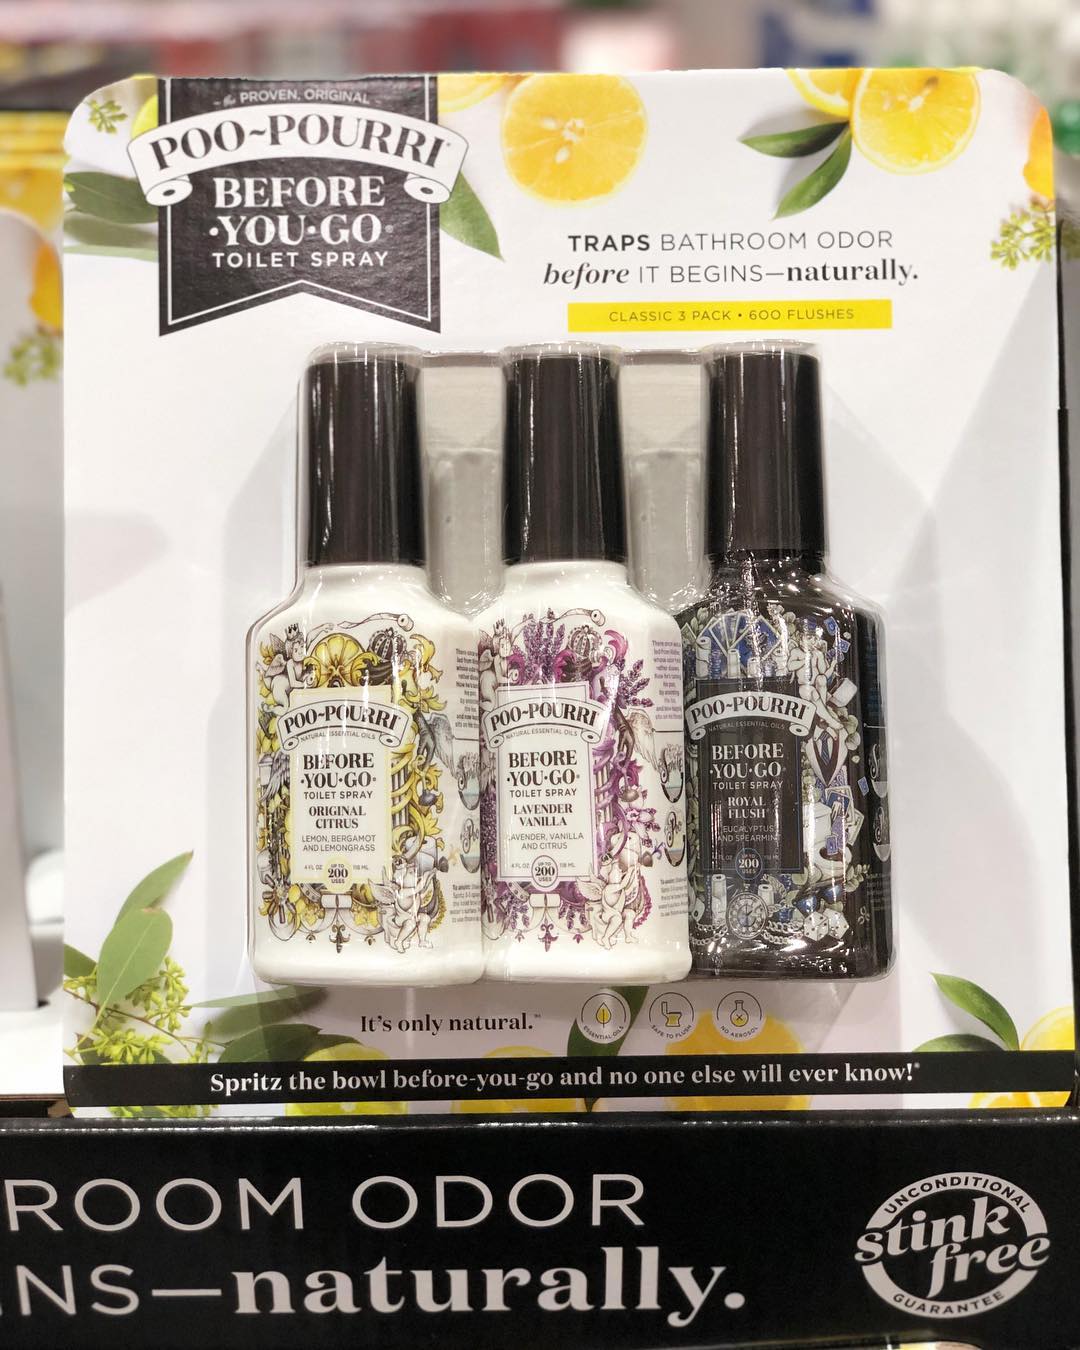 Costco Members: Poo-Pourri Toilet Spray, Variety Pack, 3.4 fl oz, 3-count (In-Store) $12.49